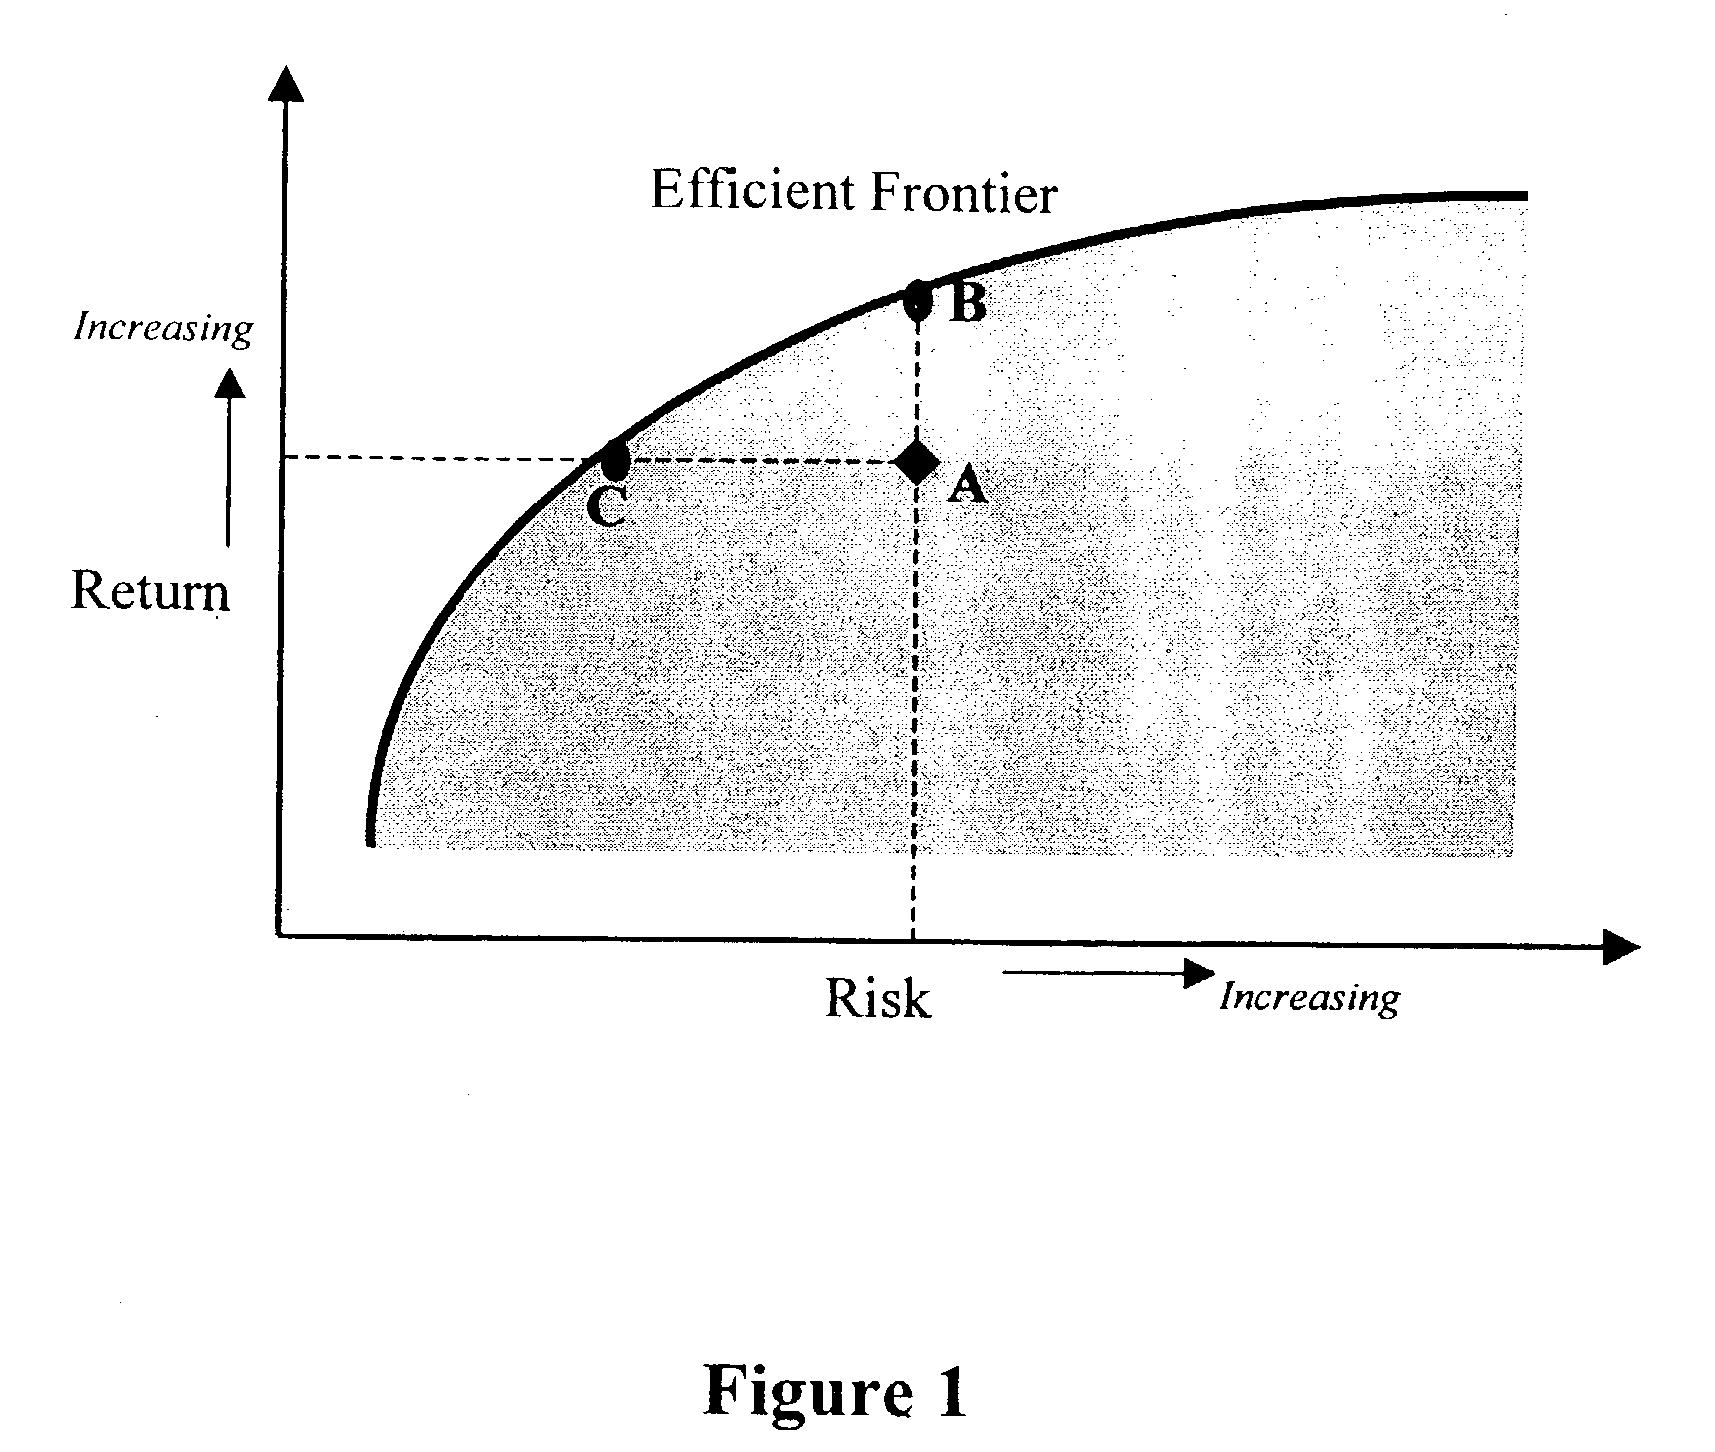 Method and apparatus for diversifying investment based on risk tolerance